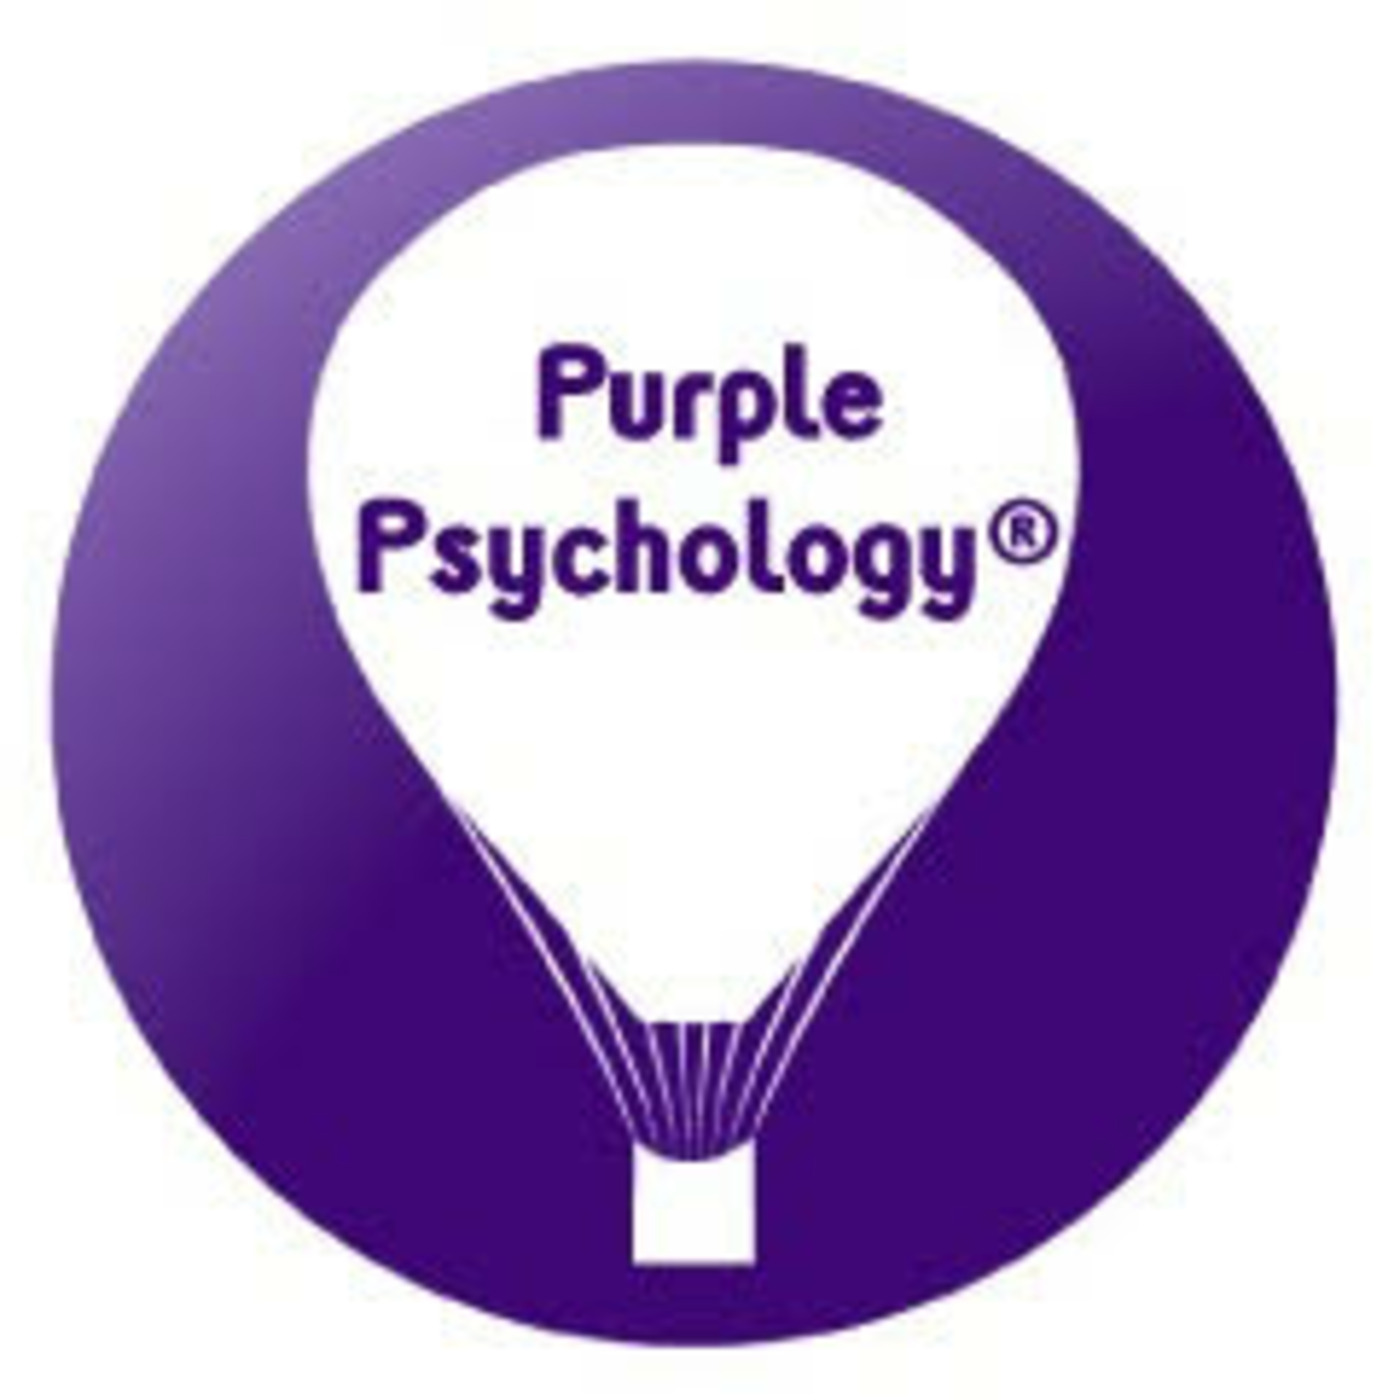 Episode 1: (again) New introduction to Purple Psychology Podcast by Dr Naoise O'Reilly